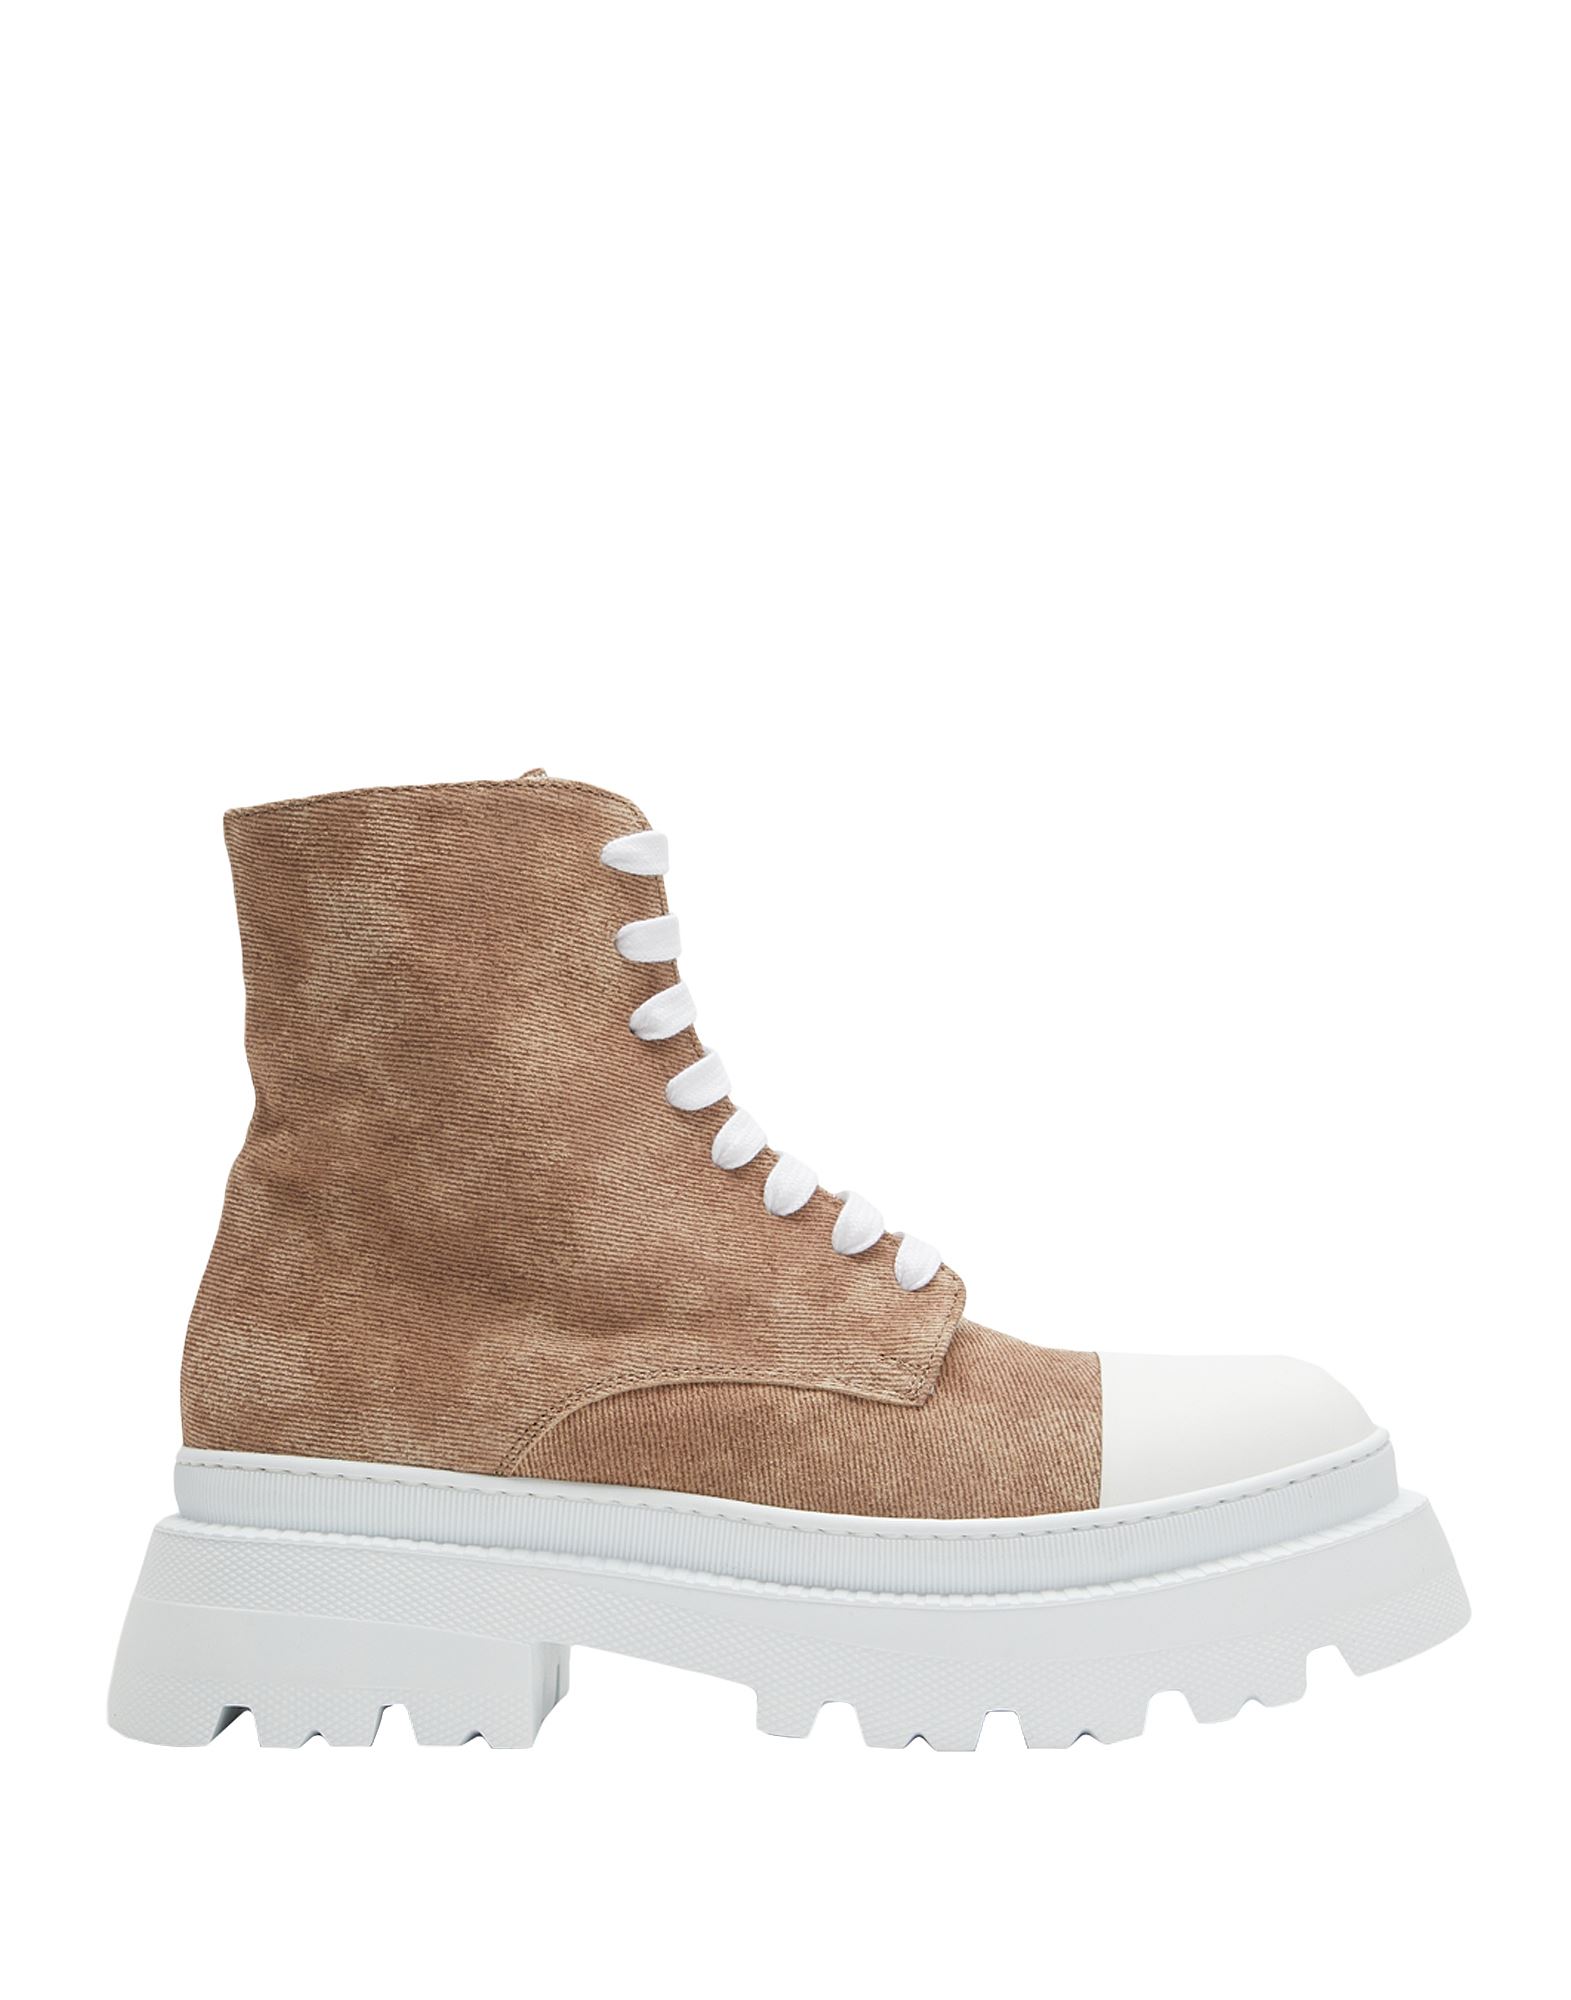 8 By Yoox Ankle Boots In Beige